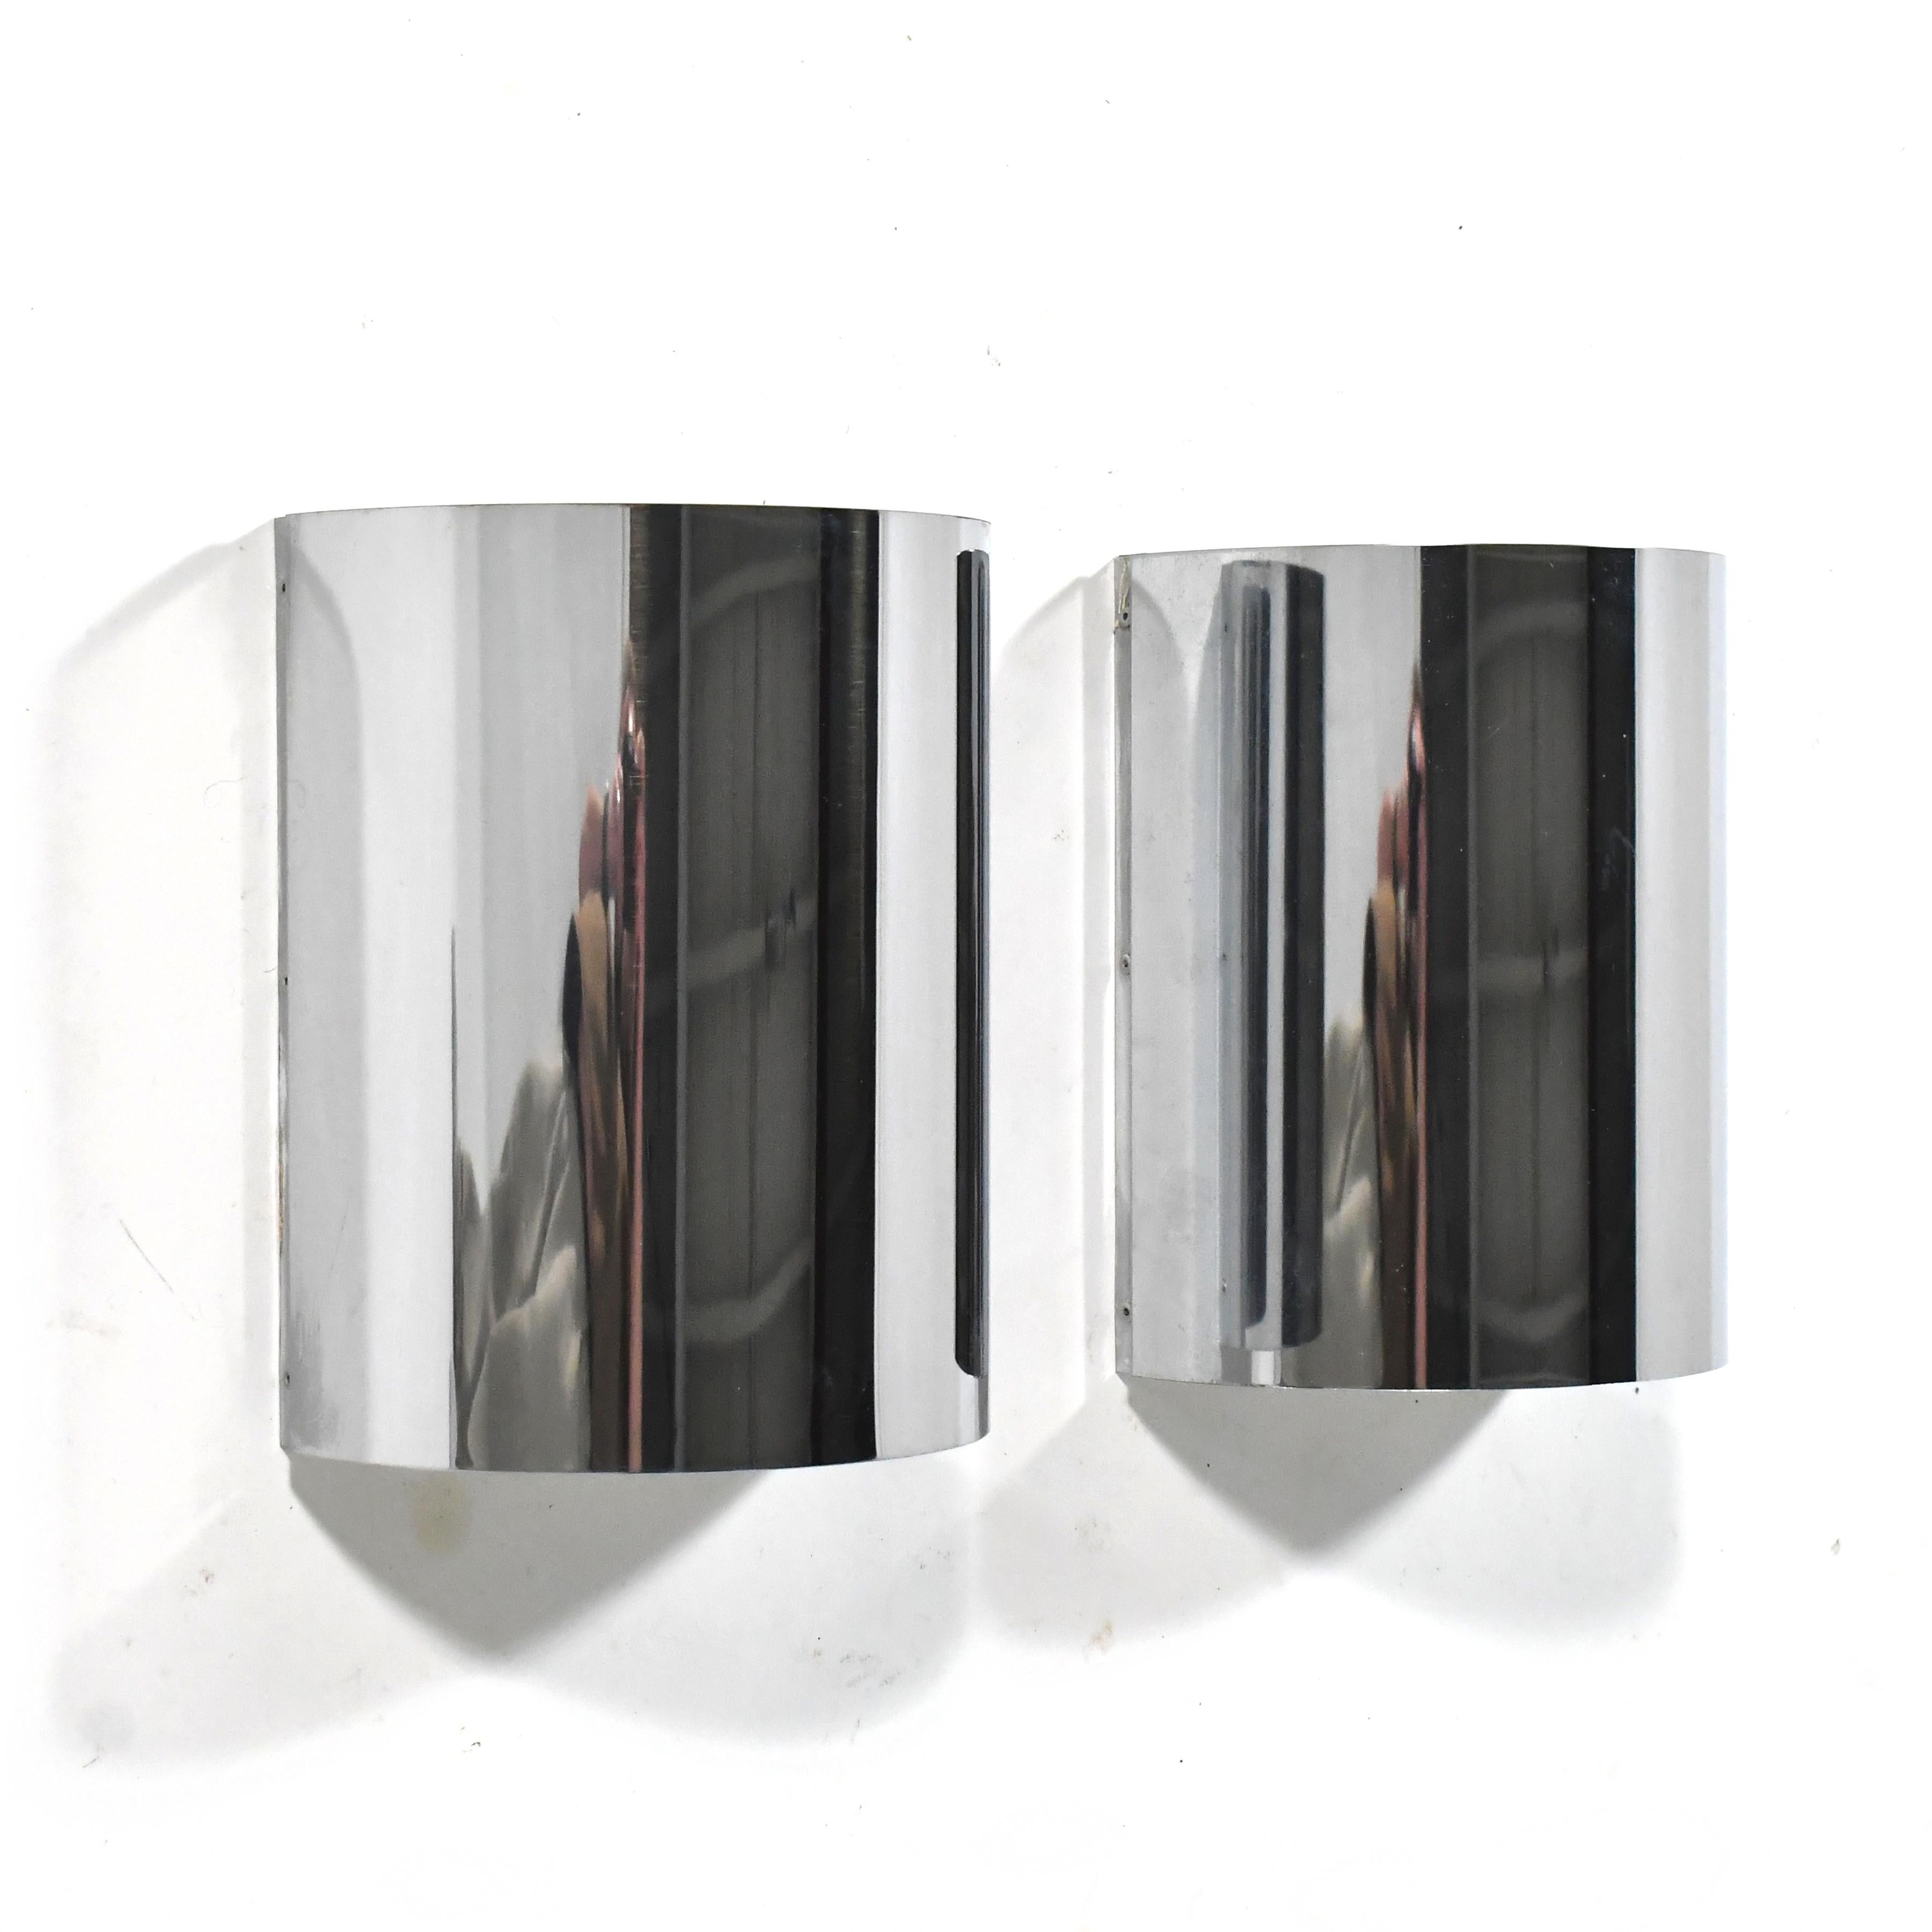 This pair of elegant, minimalist wall sconce lamps feature chrome-plated semi-circular-shaped steel shades concealing two bulb fixtures that cast light upward and downward. They are unmarked other than a model number, but have an aesthetic very